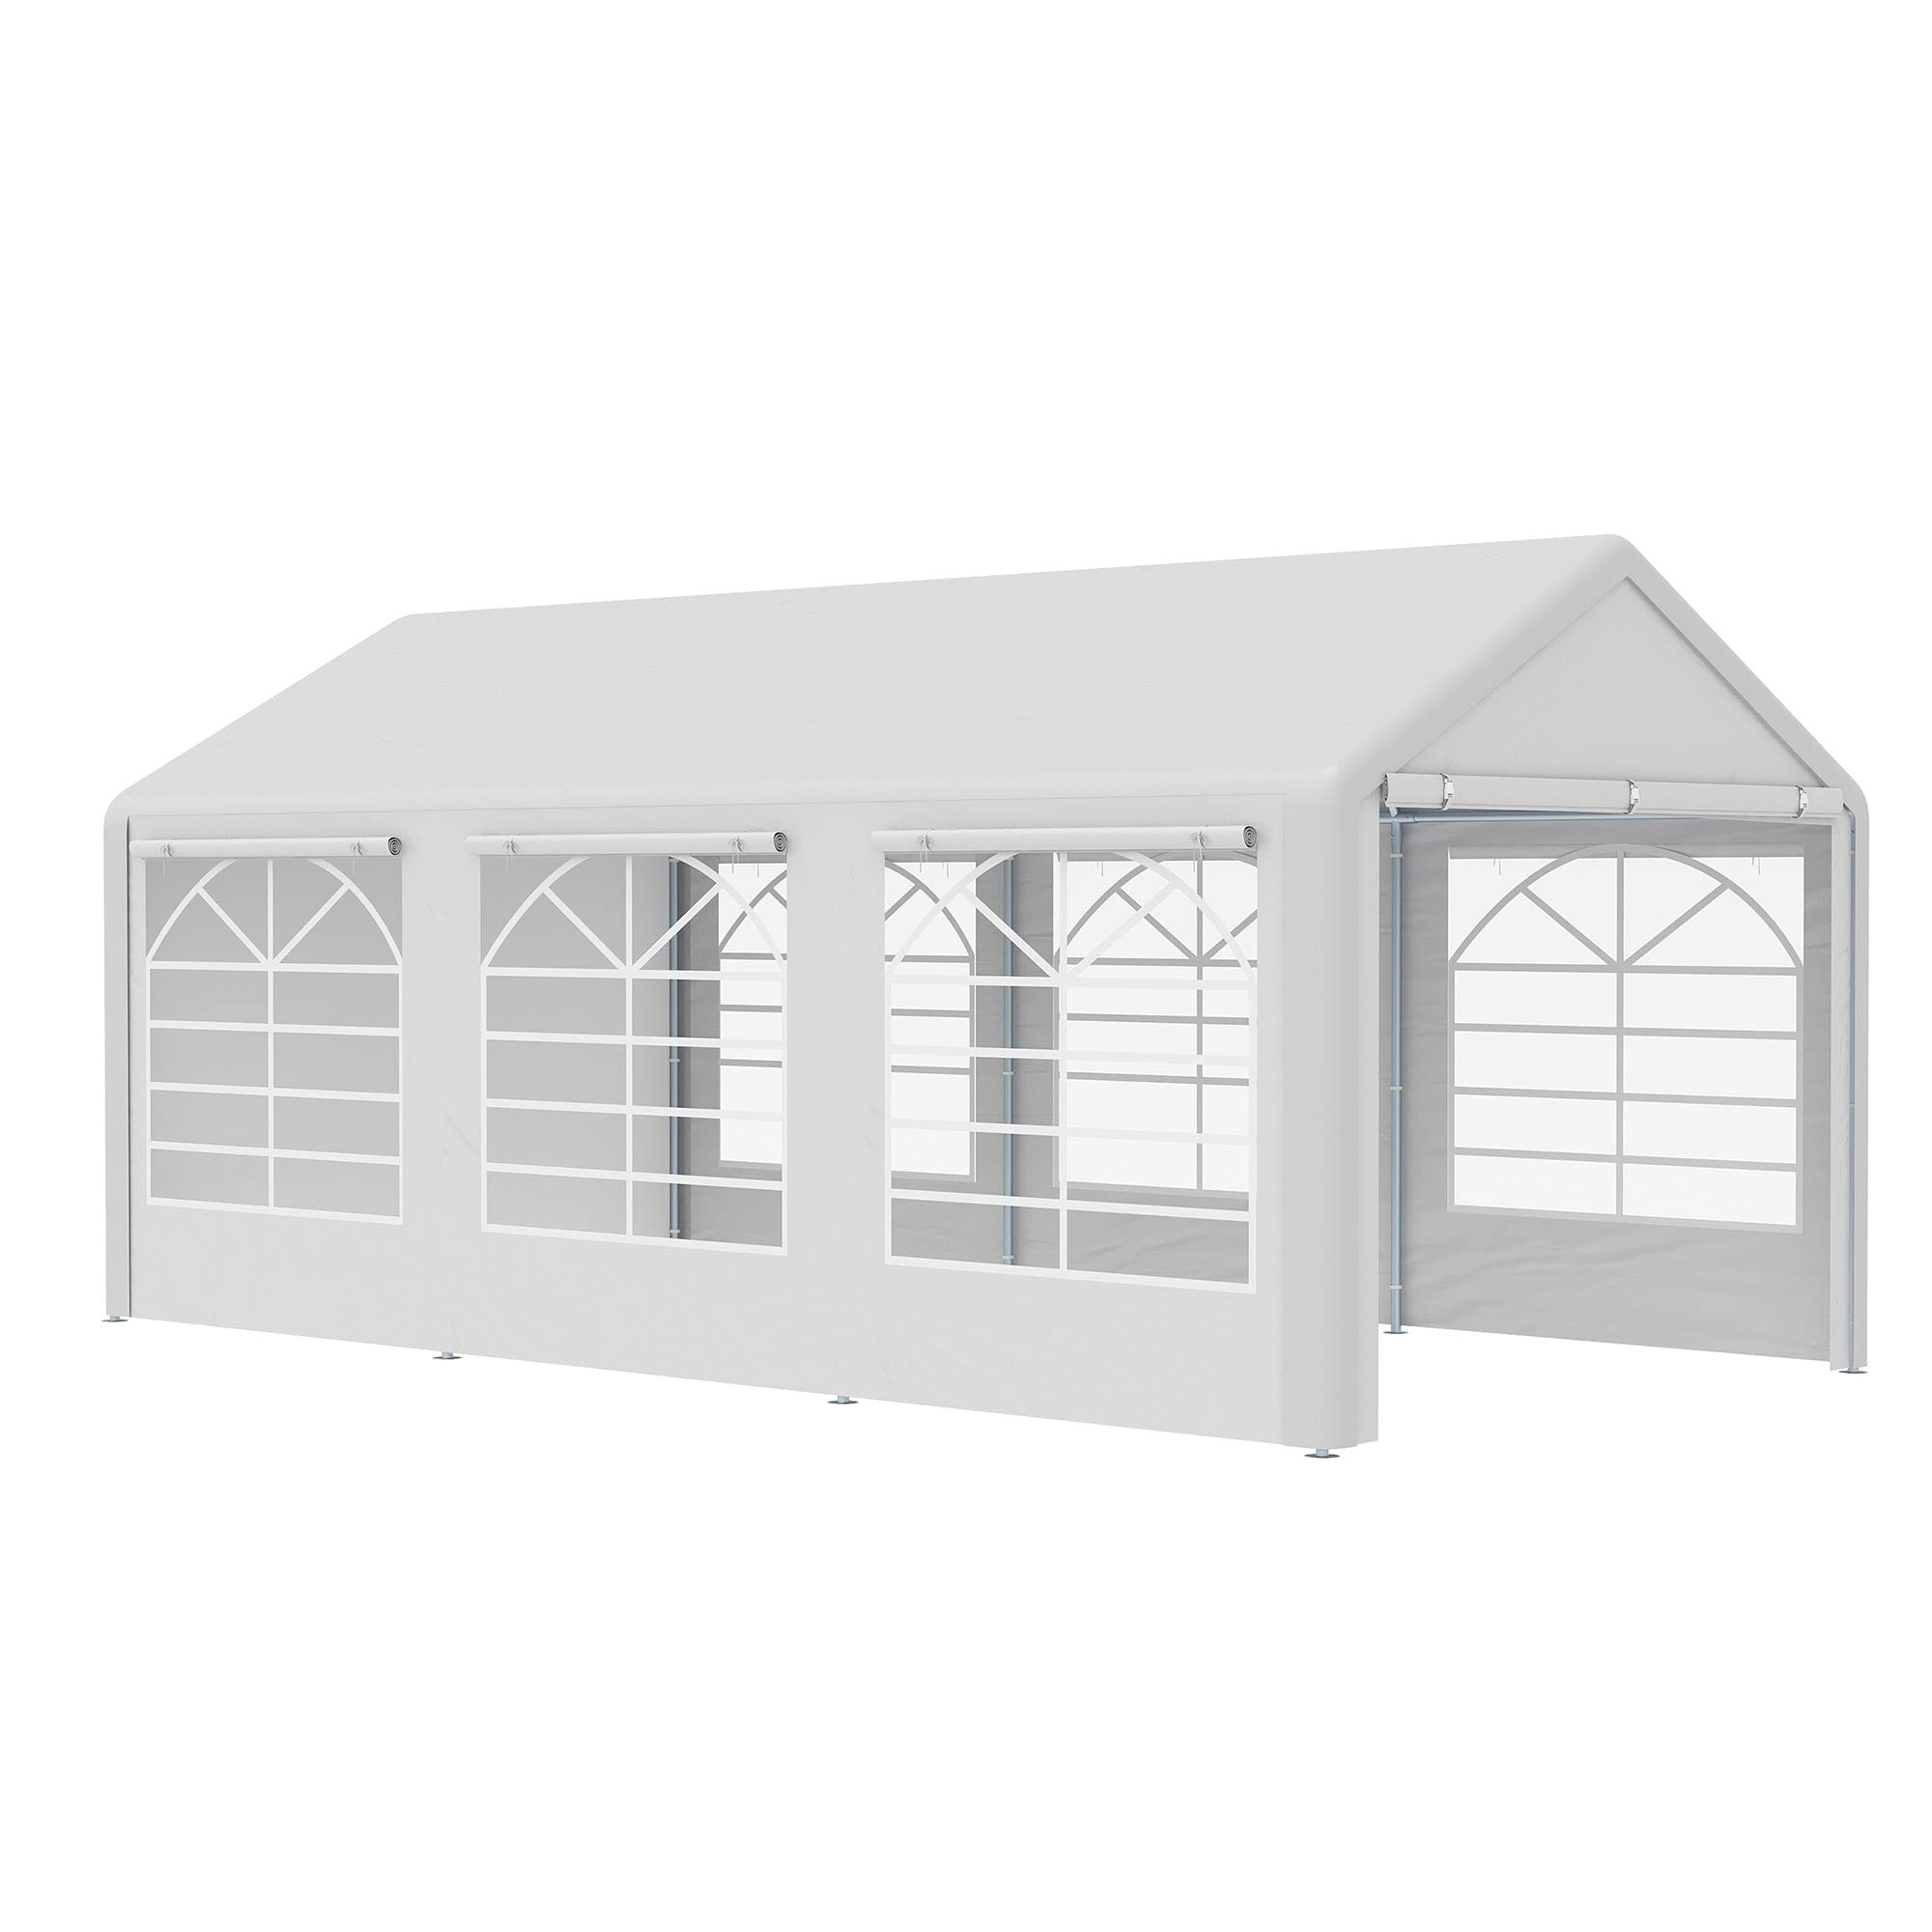 Outsunny 10' x 20' Heavy Duty Party Tent & Carport with Removable Sidewalls and Double Doors, Large Canopy Tent, Sun Shade Shelter, for Parties, Wedding, Outdoor Events, BBQ, White